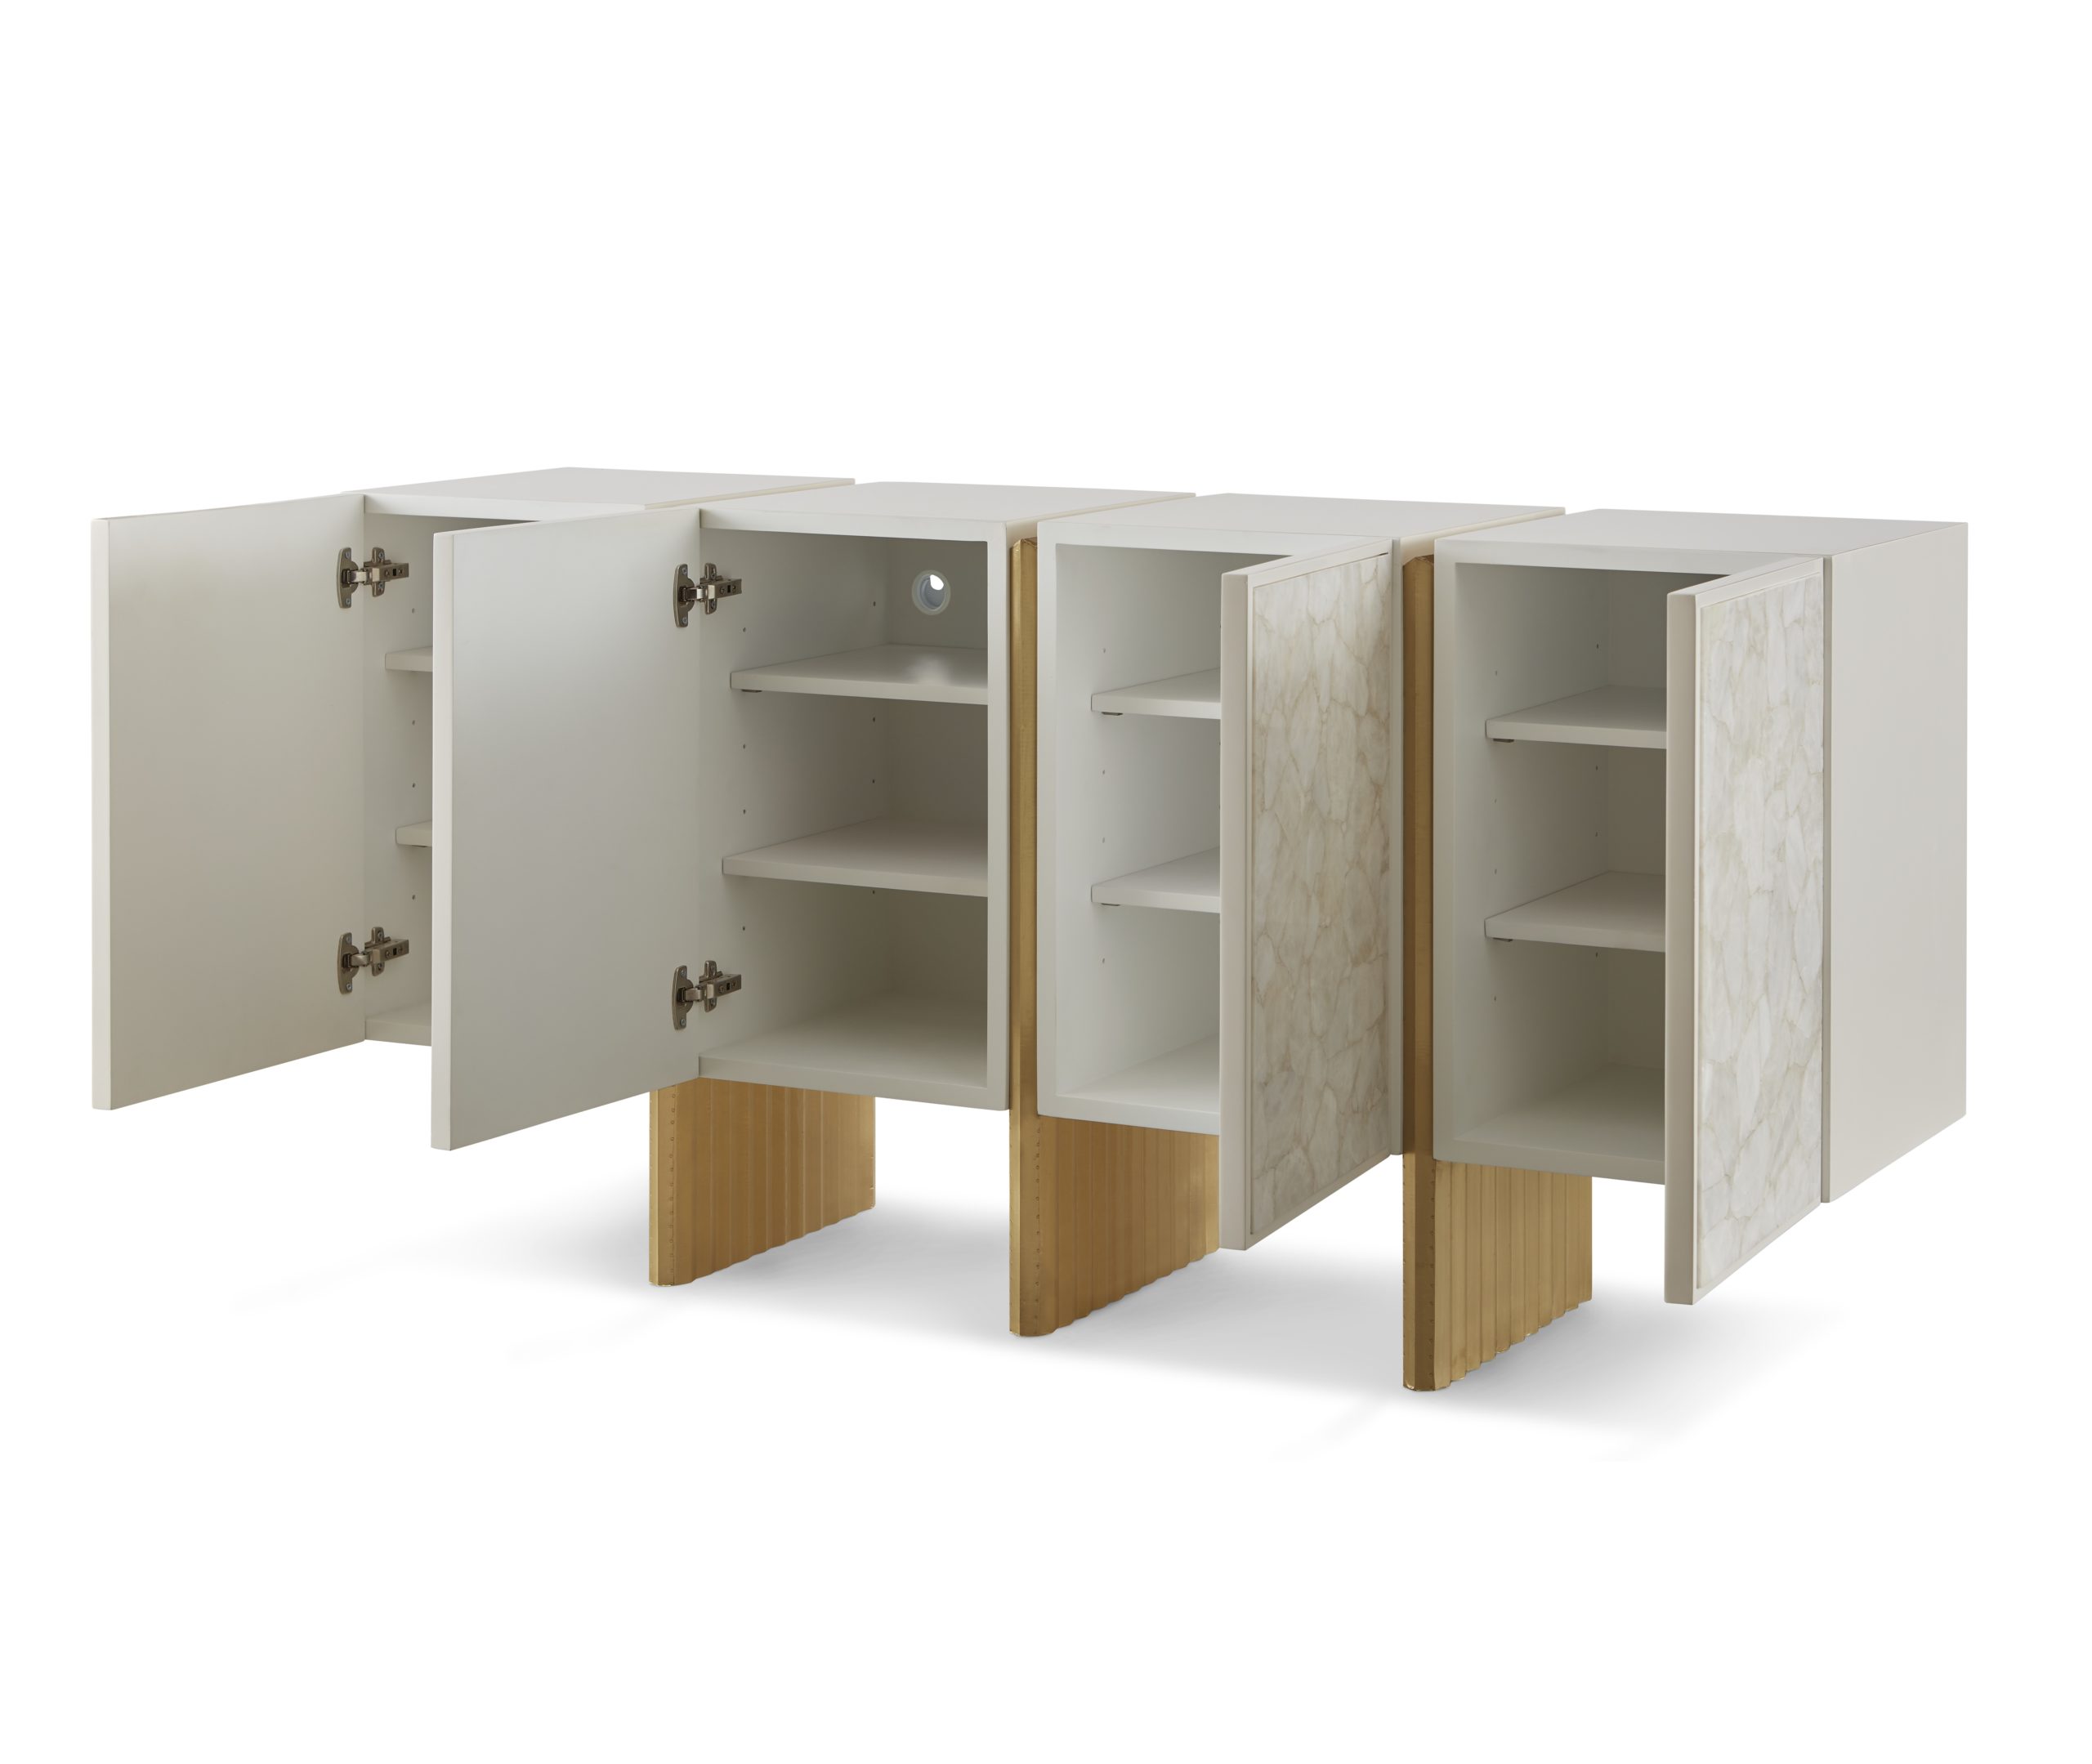 Baker_products_WNWN_kira_credenza_BAA3028_OPEN-scaled-1